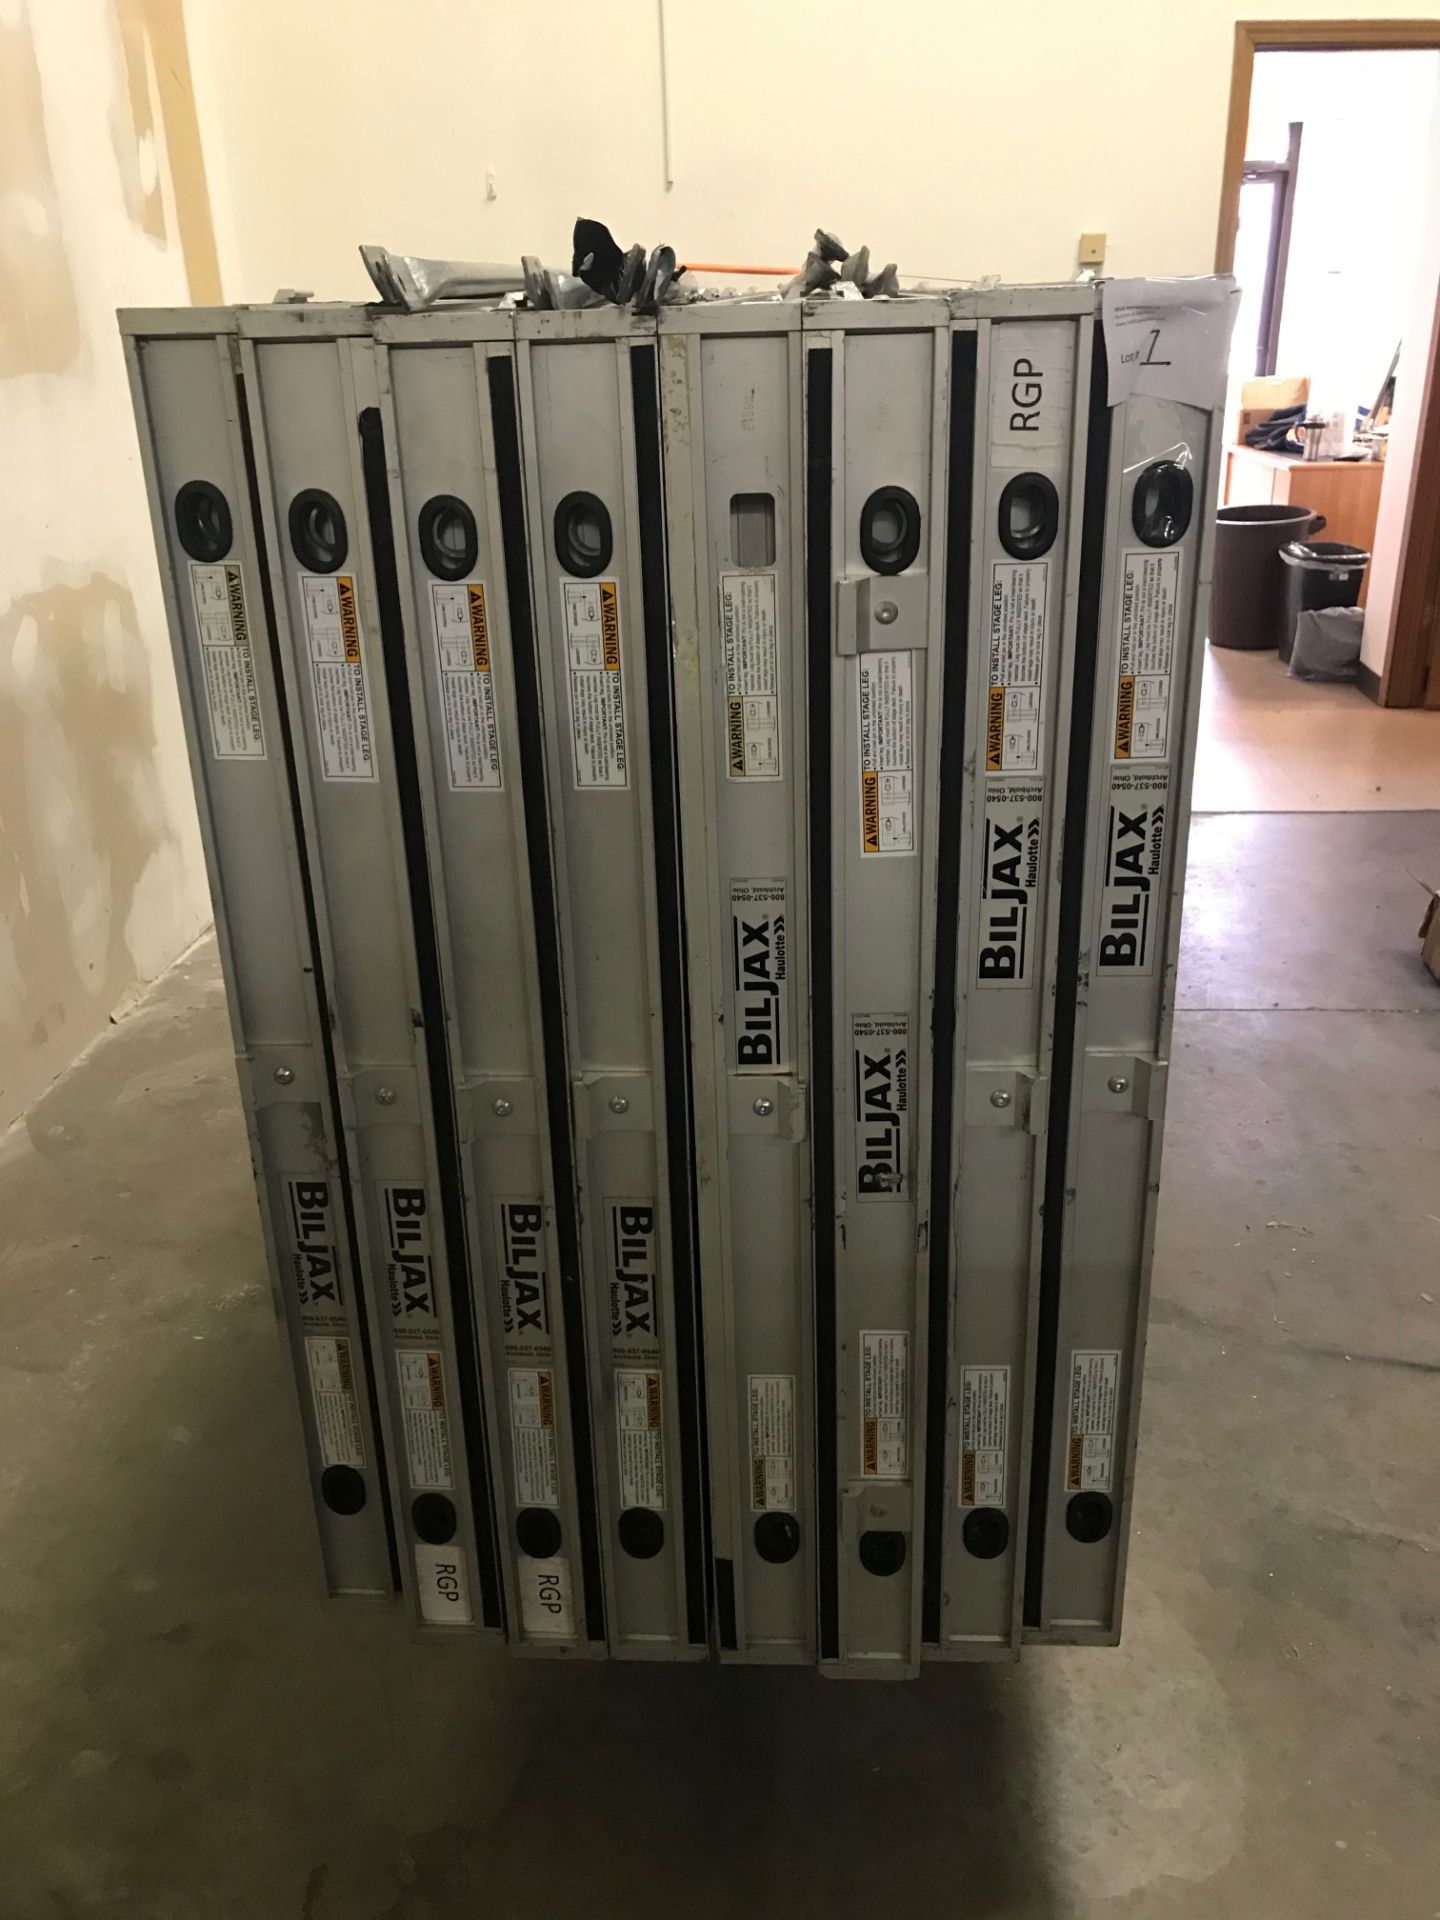 LOT OF: (8) 8' X 4' HAULETTE BILJAX DECK PANELS FOR STAGE W/ CART AND ACCESORIES - Image 3 of 5